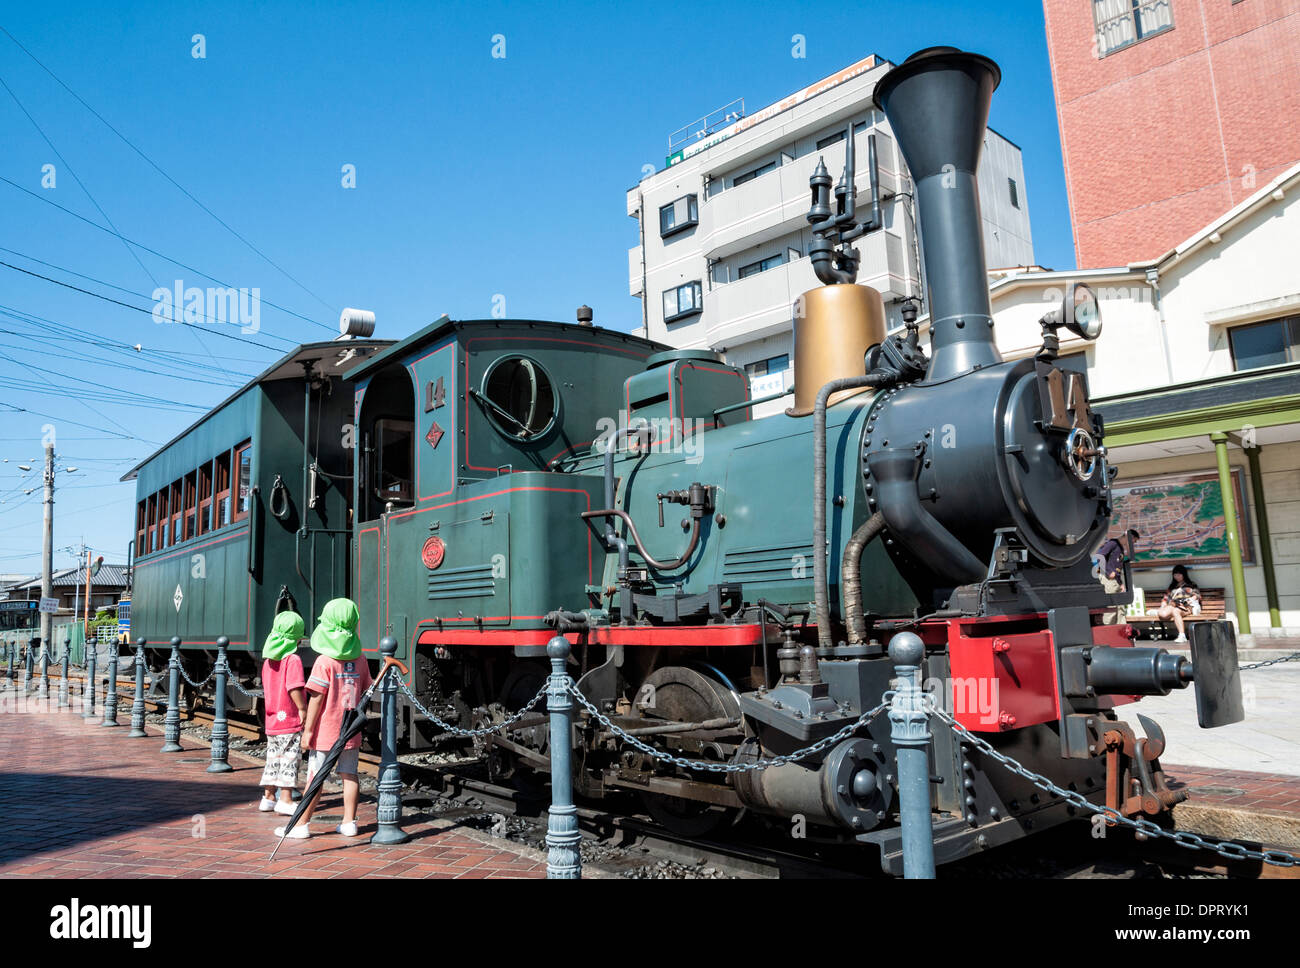 Children look at the machinery of a small, cute steam engine. Please click for full info. Stock Photo